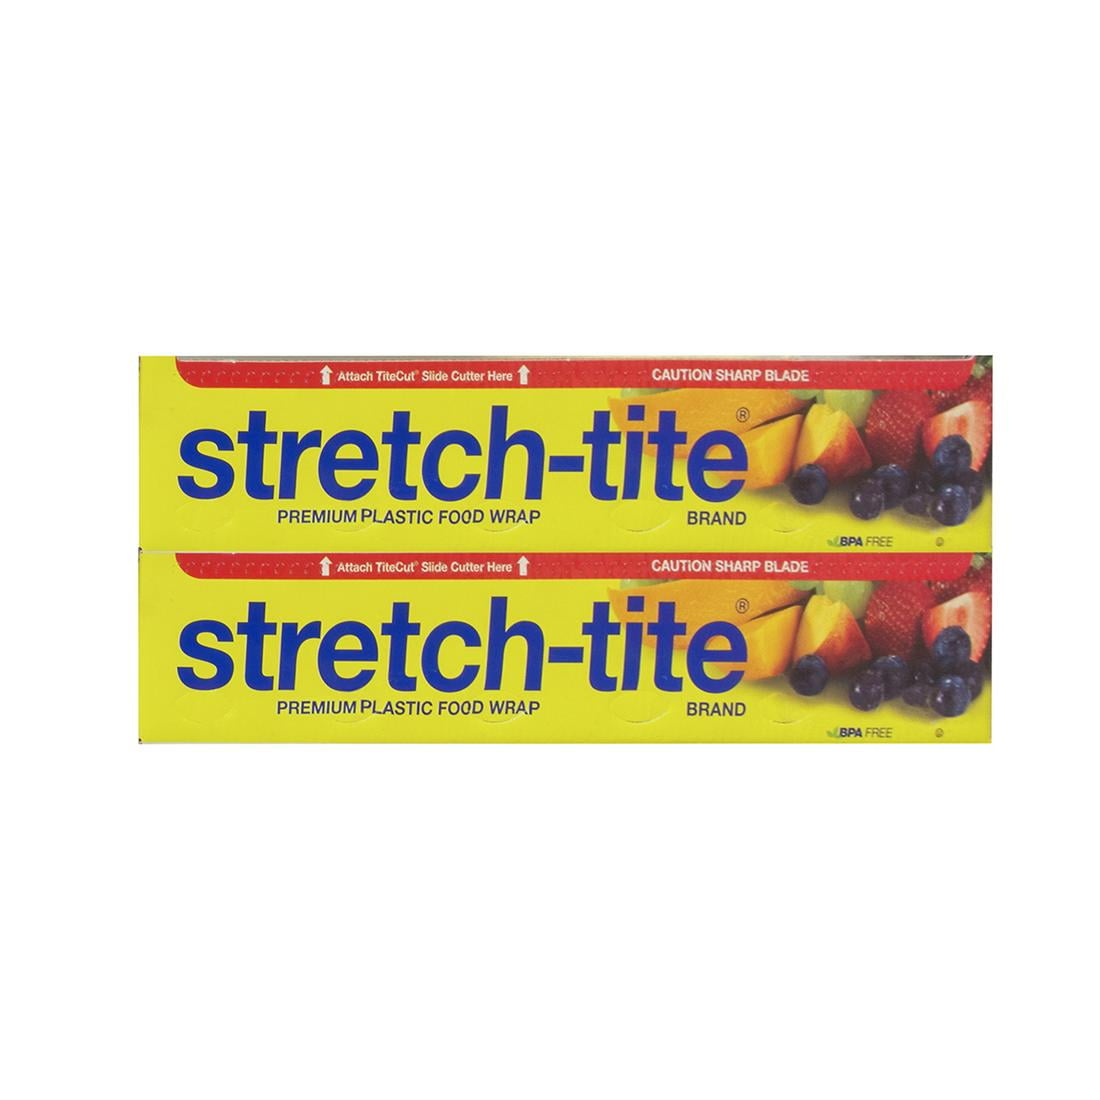  Stretch-tite Plastic Food Wrap, 500 Sq. Ft., 516.12-Ft. x  11.5/8-Inch Rolls (Pack of 4) : Office Products